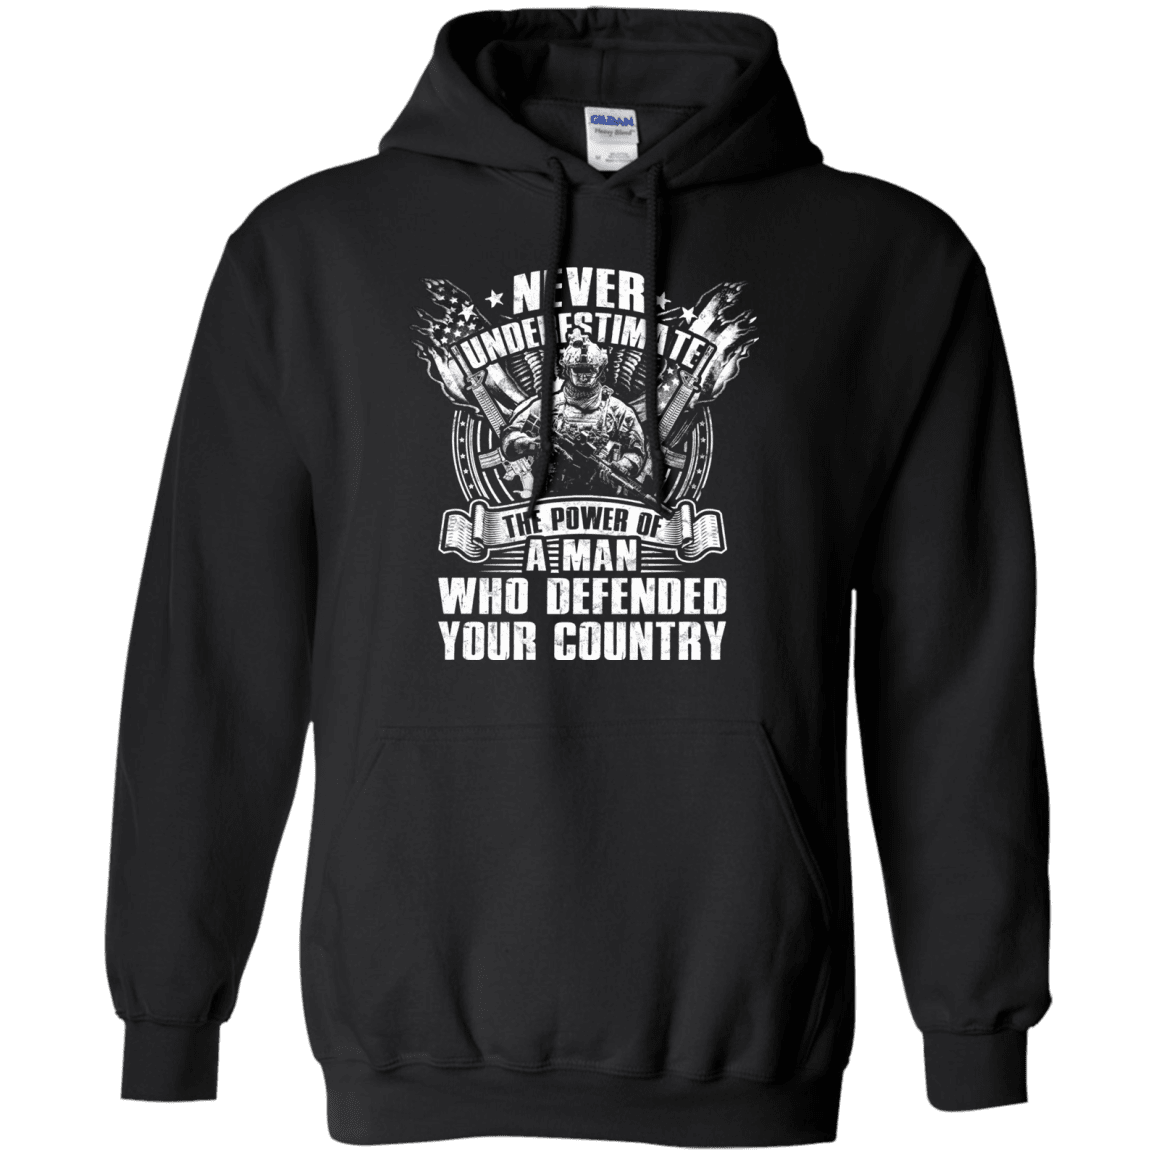 Military T-Shirt "Never Underestimate The Power of Man Defended Country Men" Front-TShirt-General-Veterans Nation